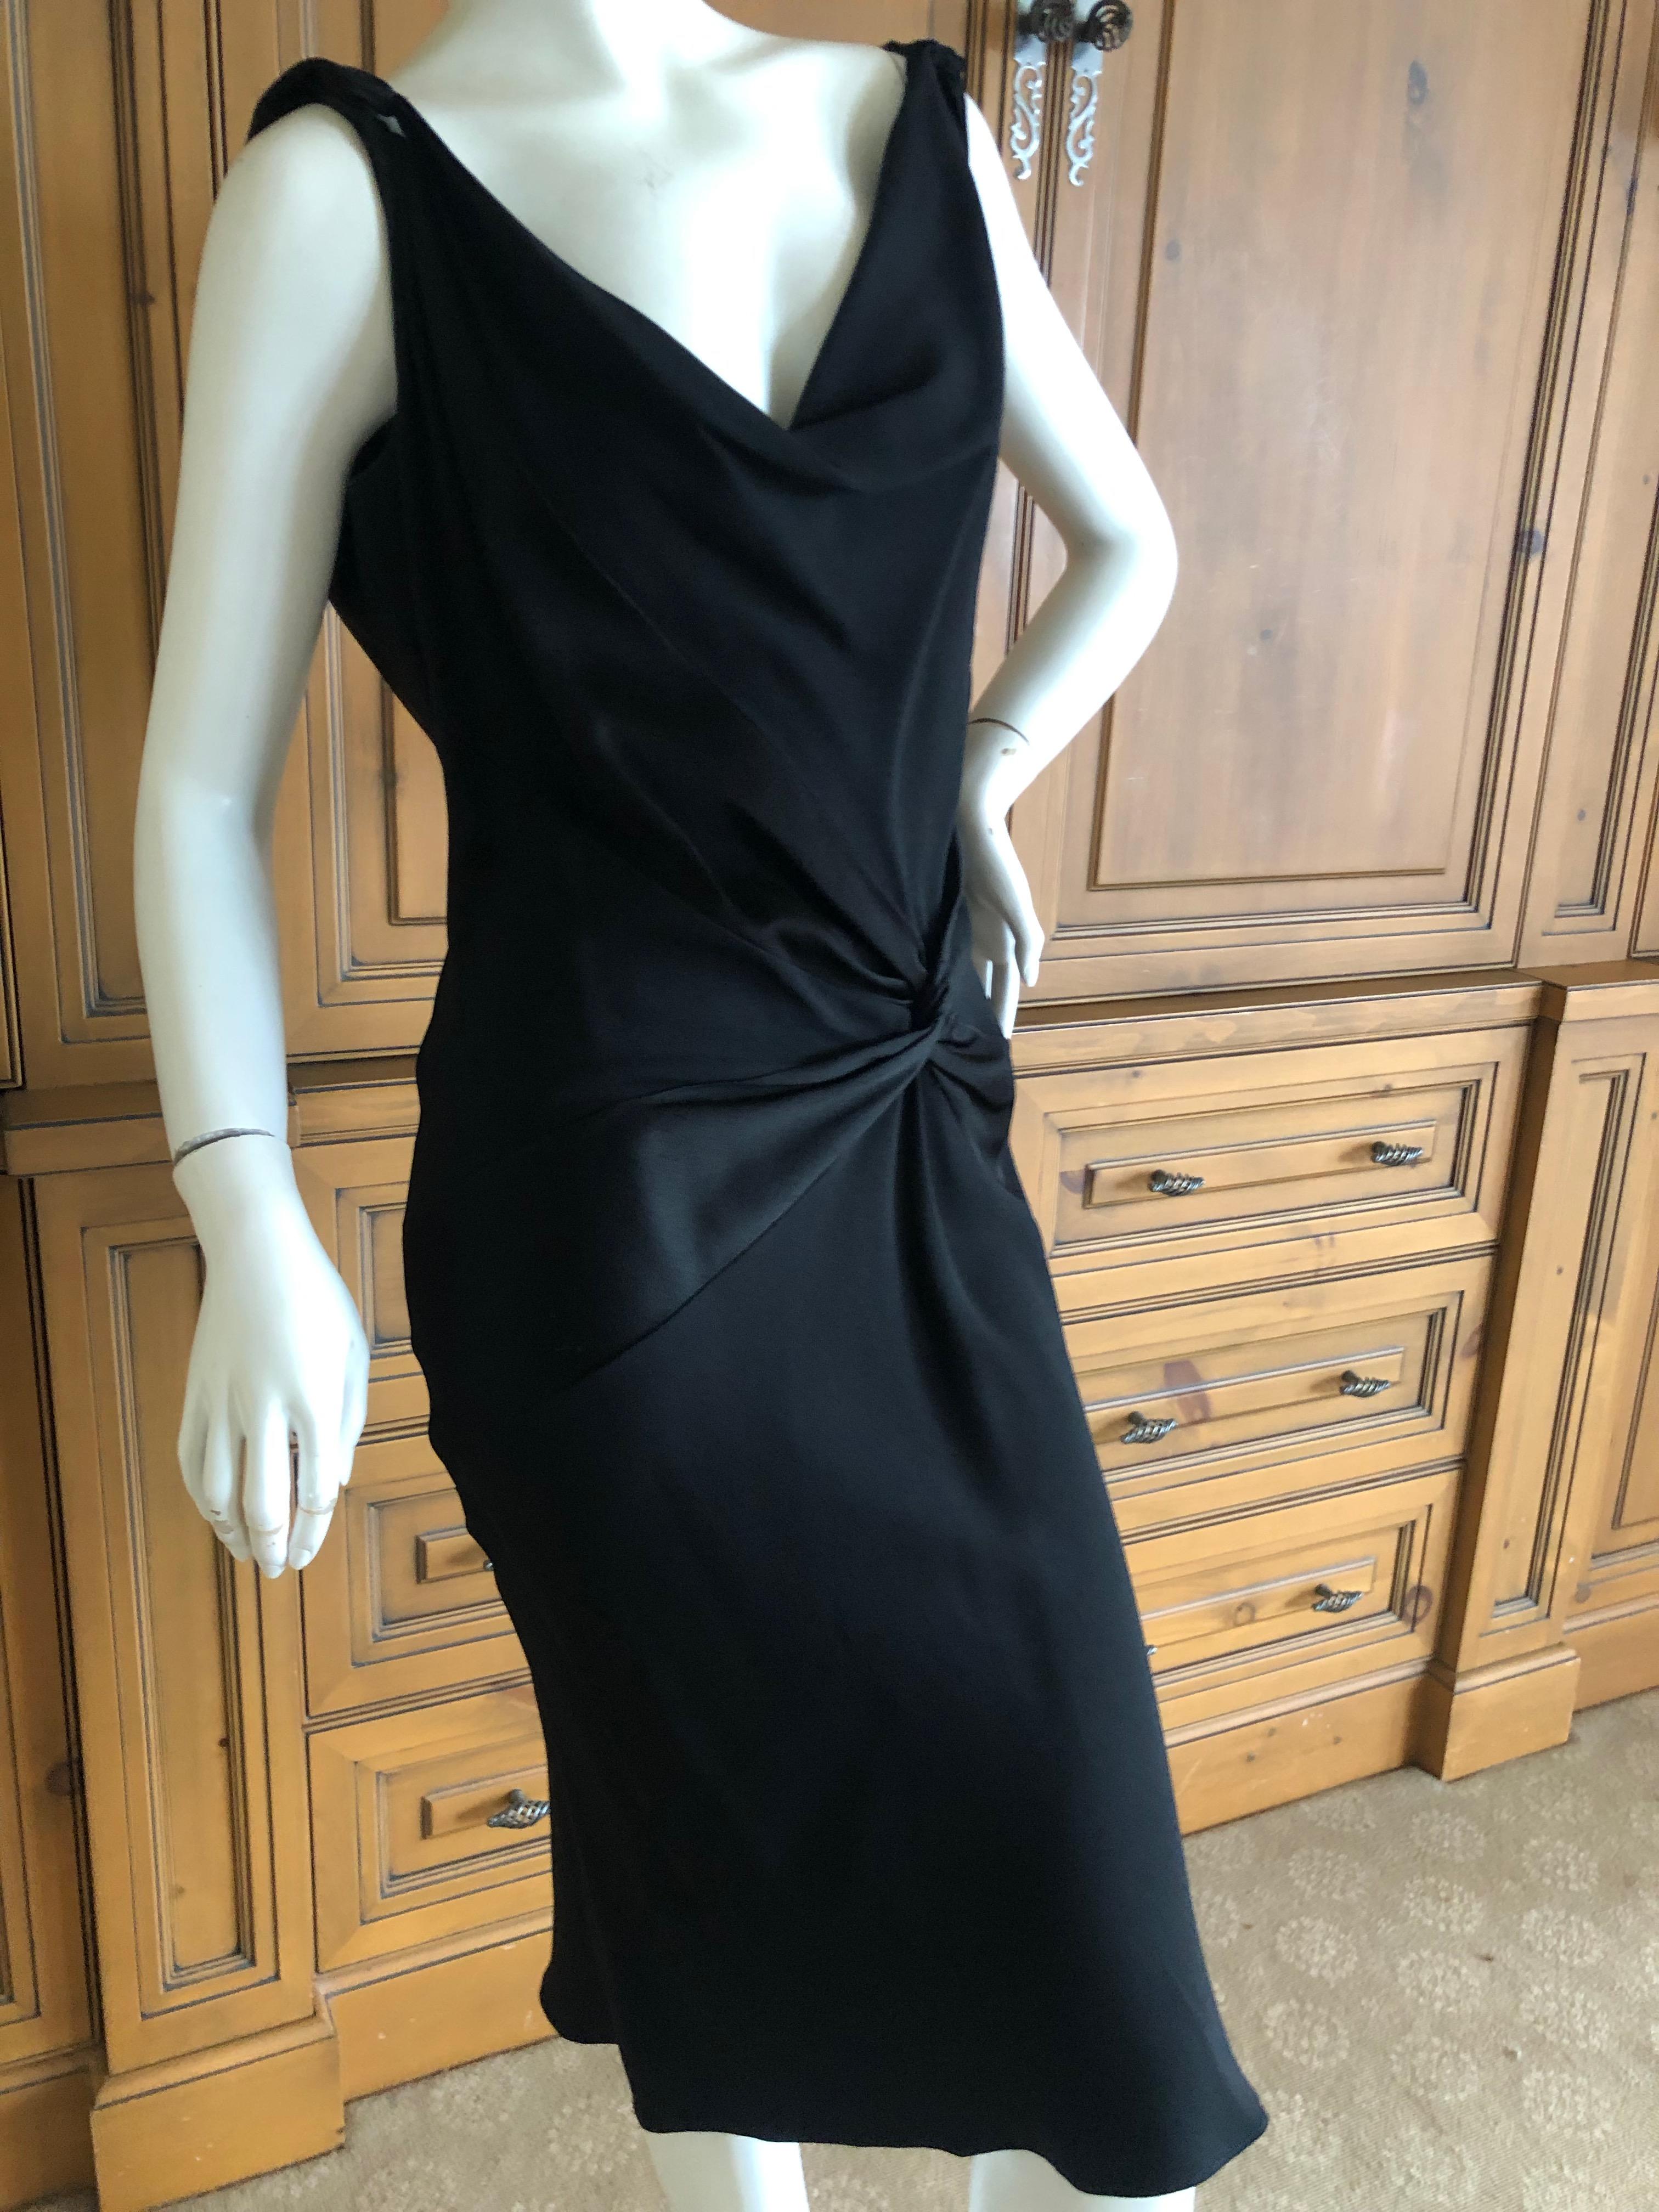 John Galliano Vintage 1990's Low Cut Black Shine and Matte Knot Dress.
This is signature Galliano, the knot motif is a repeated motif, as is his use of front and back of the fabric to create shine and matte contrasts, cut on the bias, will fit